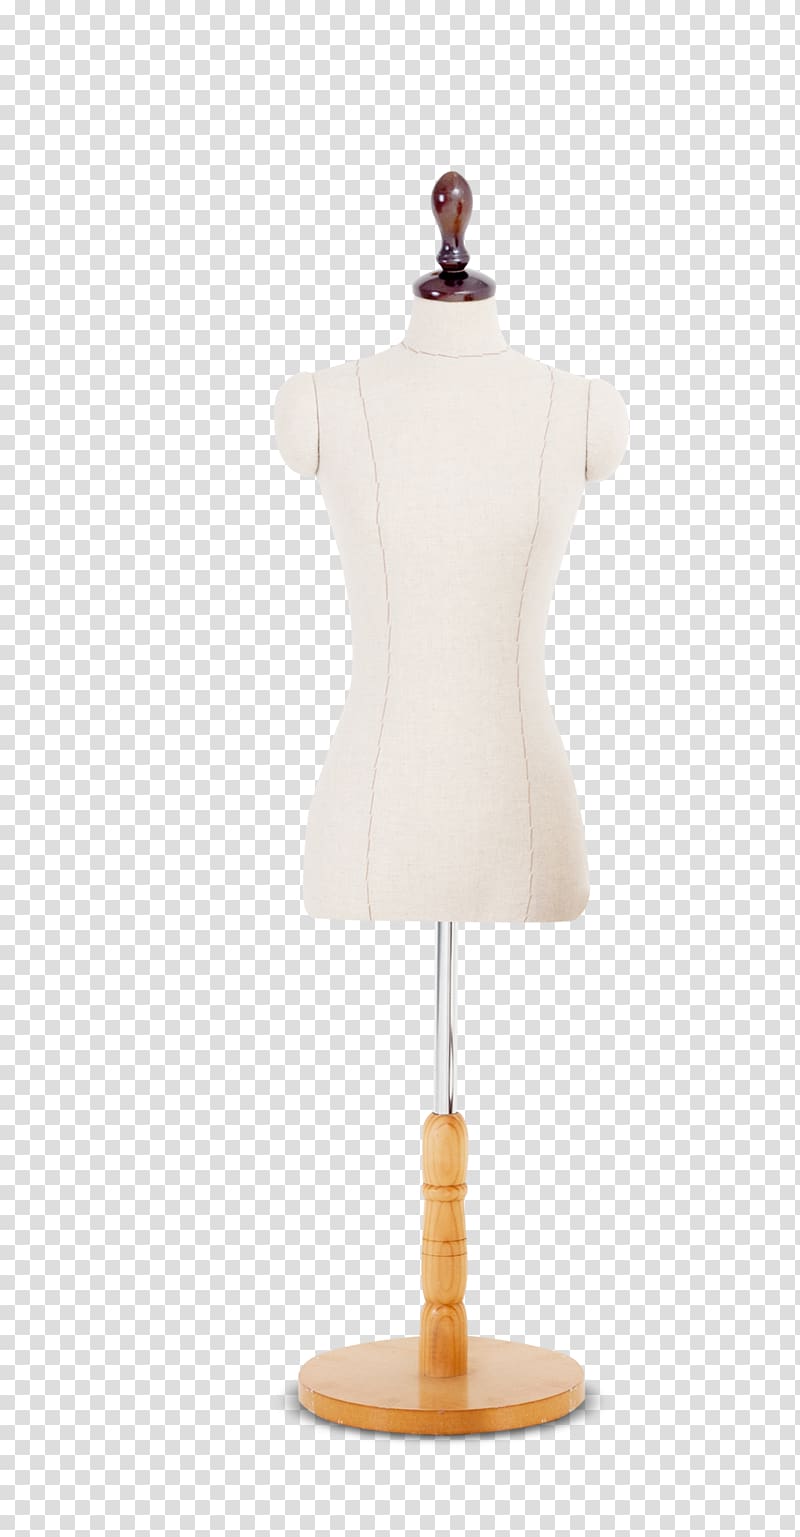 Clothing Designer, A model for making clothes transparent background PNG clipart